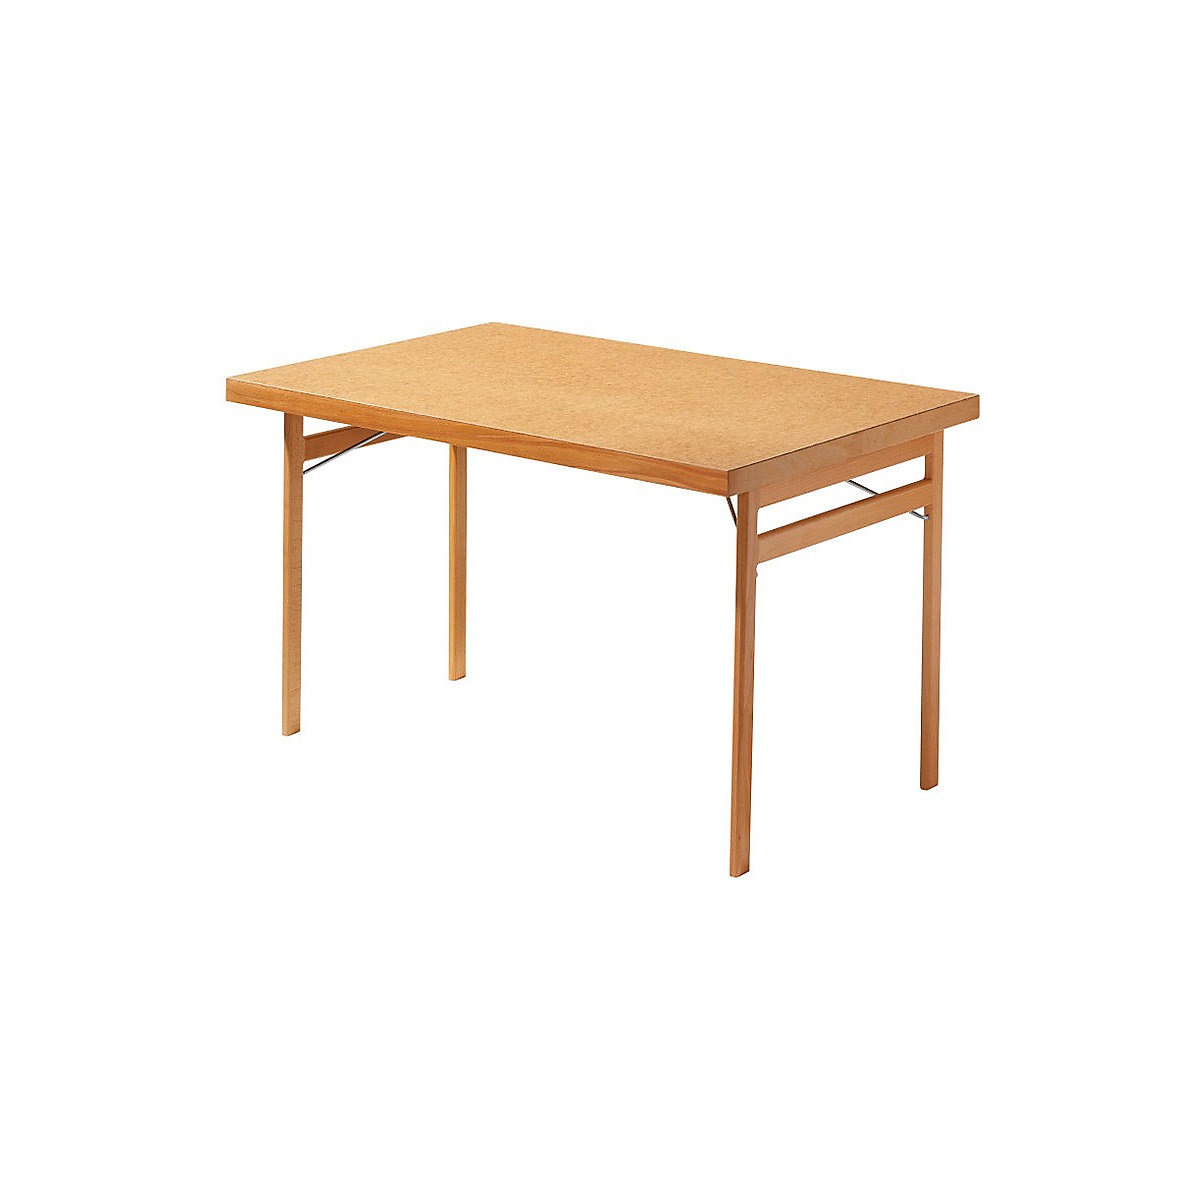 Folding table, solid wood frame, beech, WxD 1500 x 800 mm, wood tabletop-4